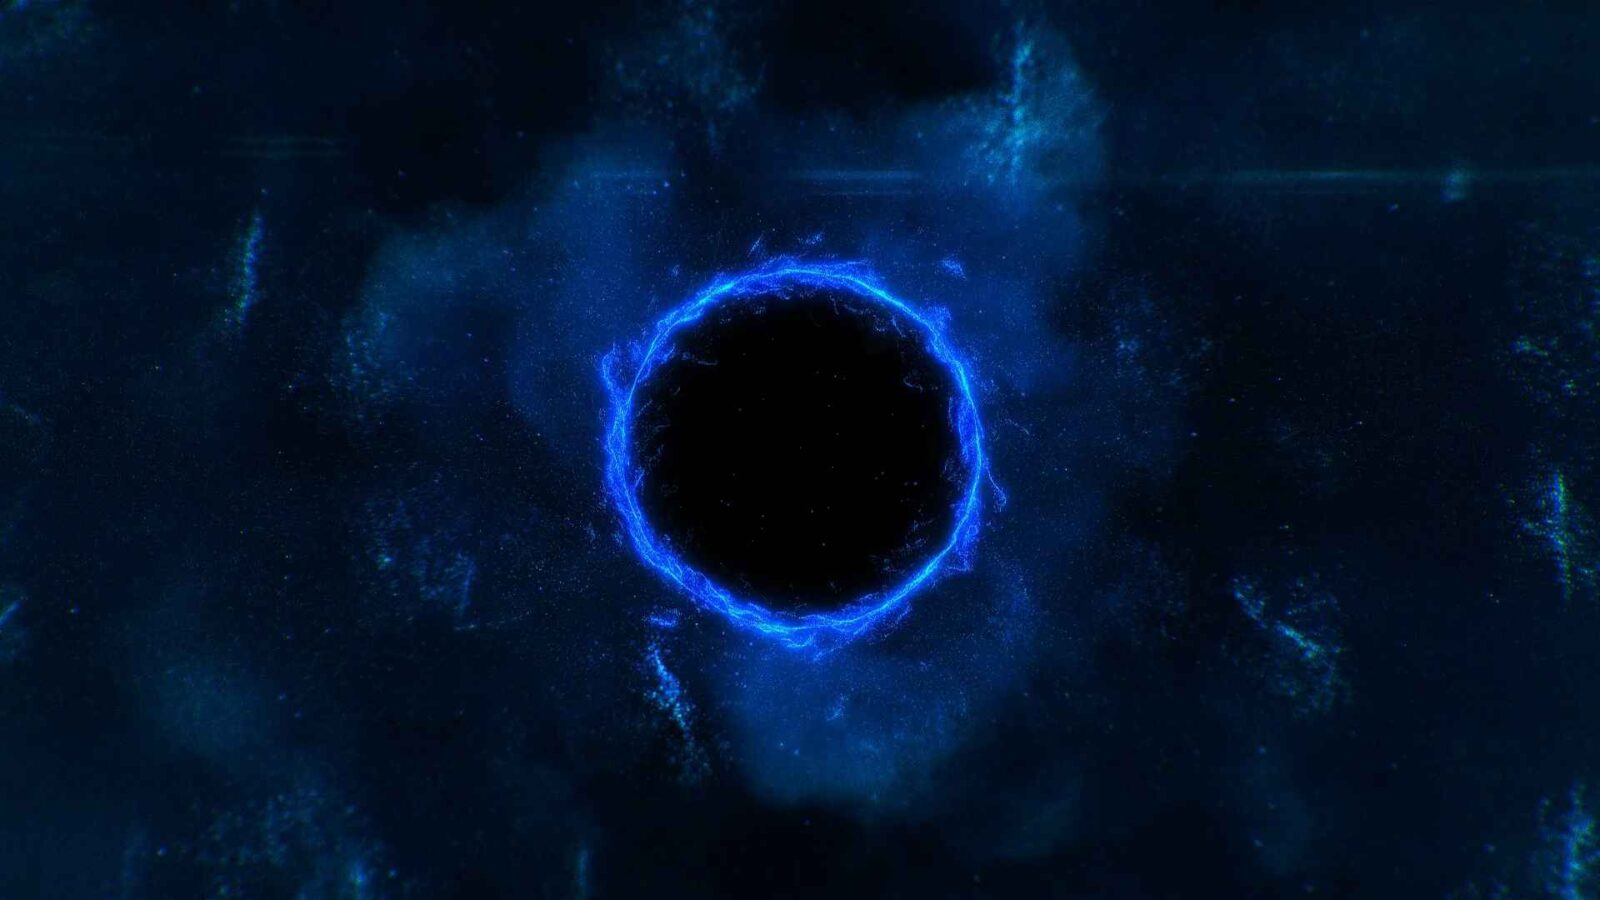 LiveWallpapers4Free.com | Animated Black Hole Space - Free Live Wallpaper